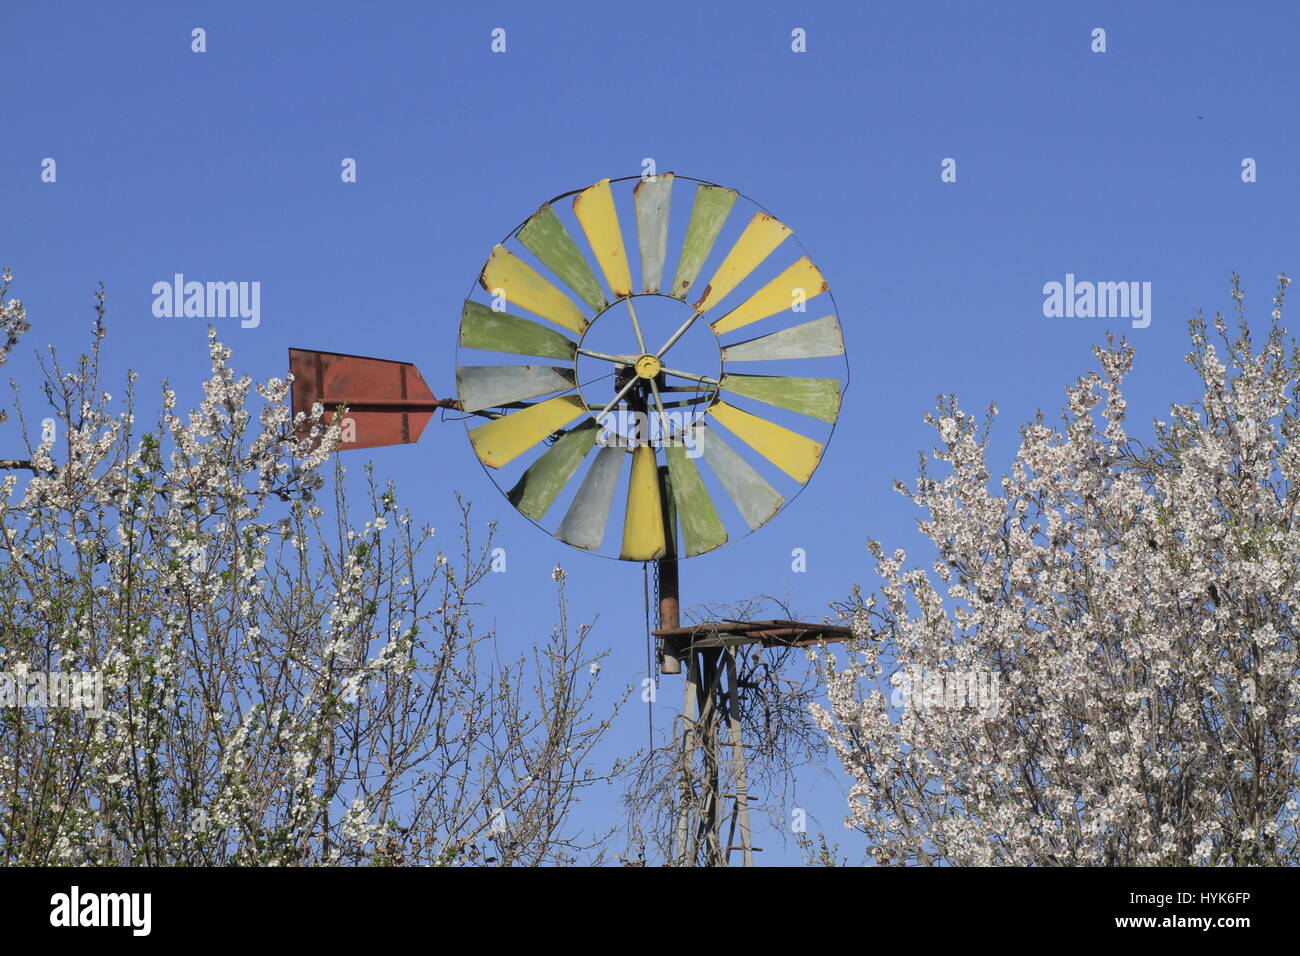 The fans of an old metal wind driven water pump between a flowering hedge against a blue sky. Stock Photo